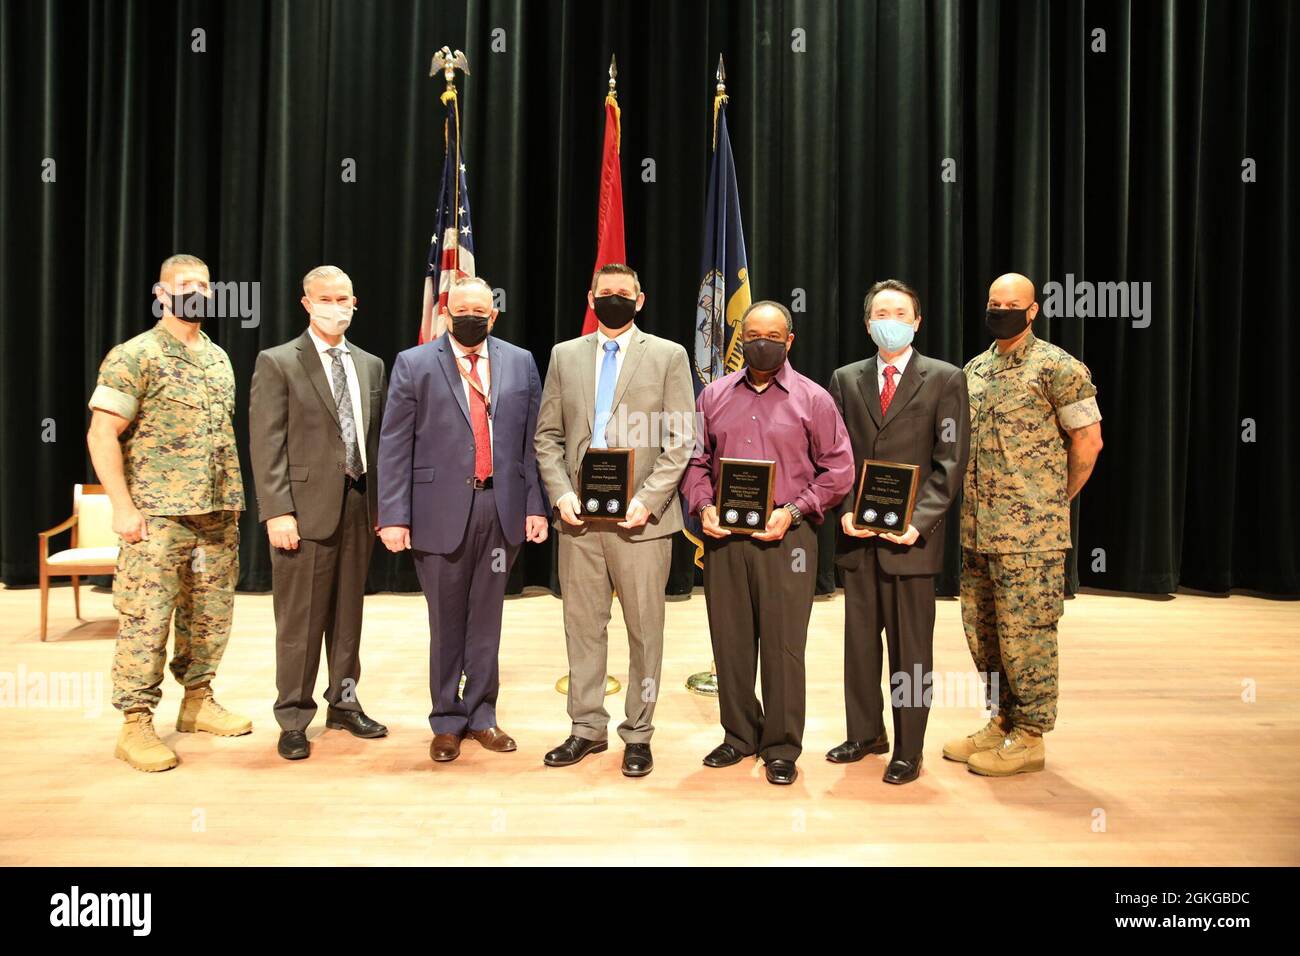 Marine Corps Systems Command’s Brig. Gen. A.J. Pasagian; U.S. Navy Executive Director for Innovation, Technology Requirements and Test and Evaluation Rick Quade; PEO Land System’s John Garner; and MCSC’s Sgt. Maj. Michael Cato pose with MCSC’s Department of Navy T&E Awards winners Andrew Ferguson, Lou Ferguson and Dr. Giang Pham, April 15, aboard Marine Corps Base Quantico, Virginia. Not pictured: Maj. Richard Zjawin. Stock Photo